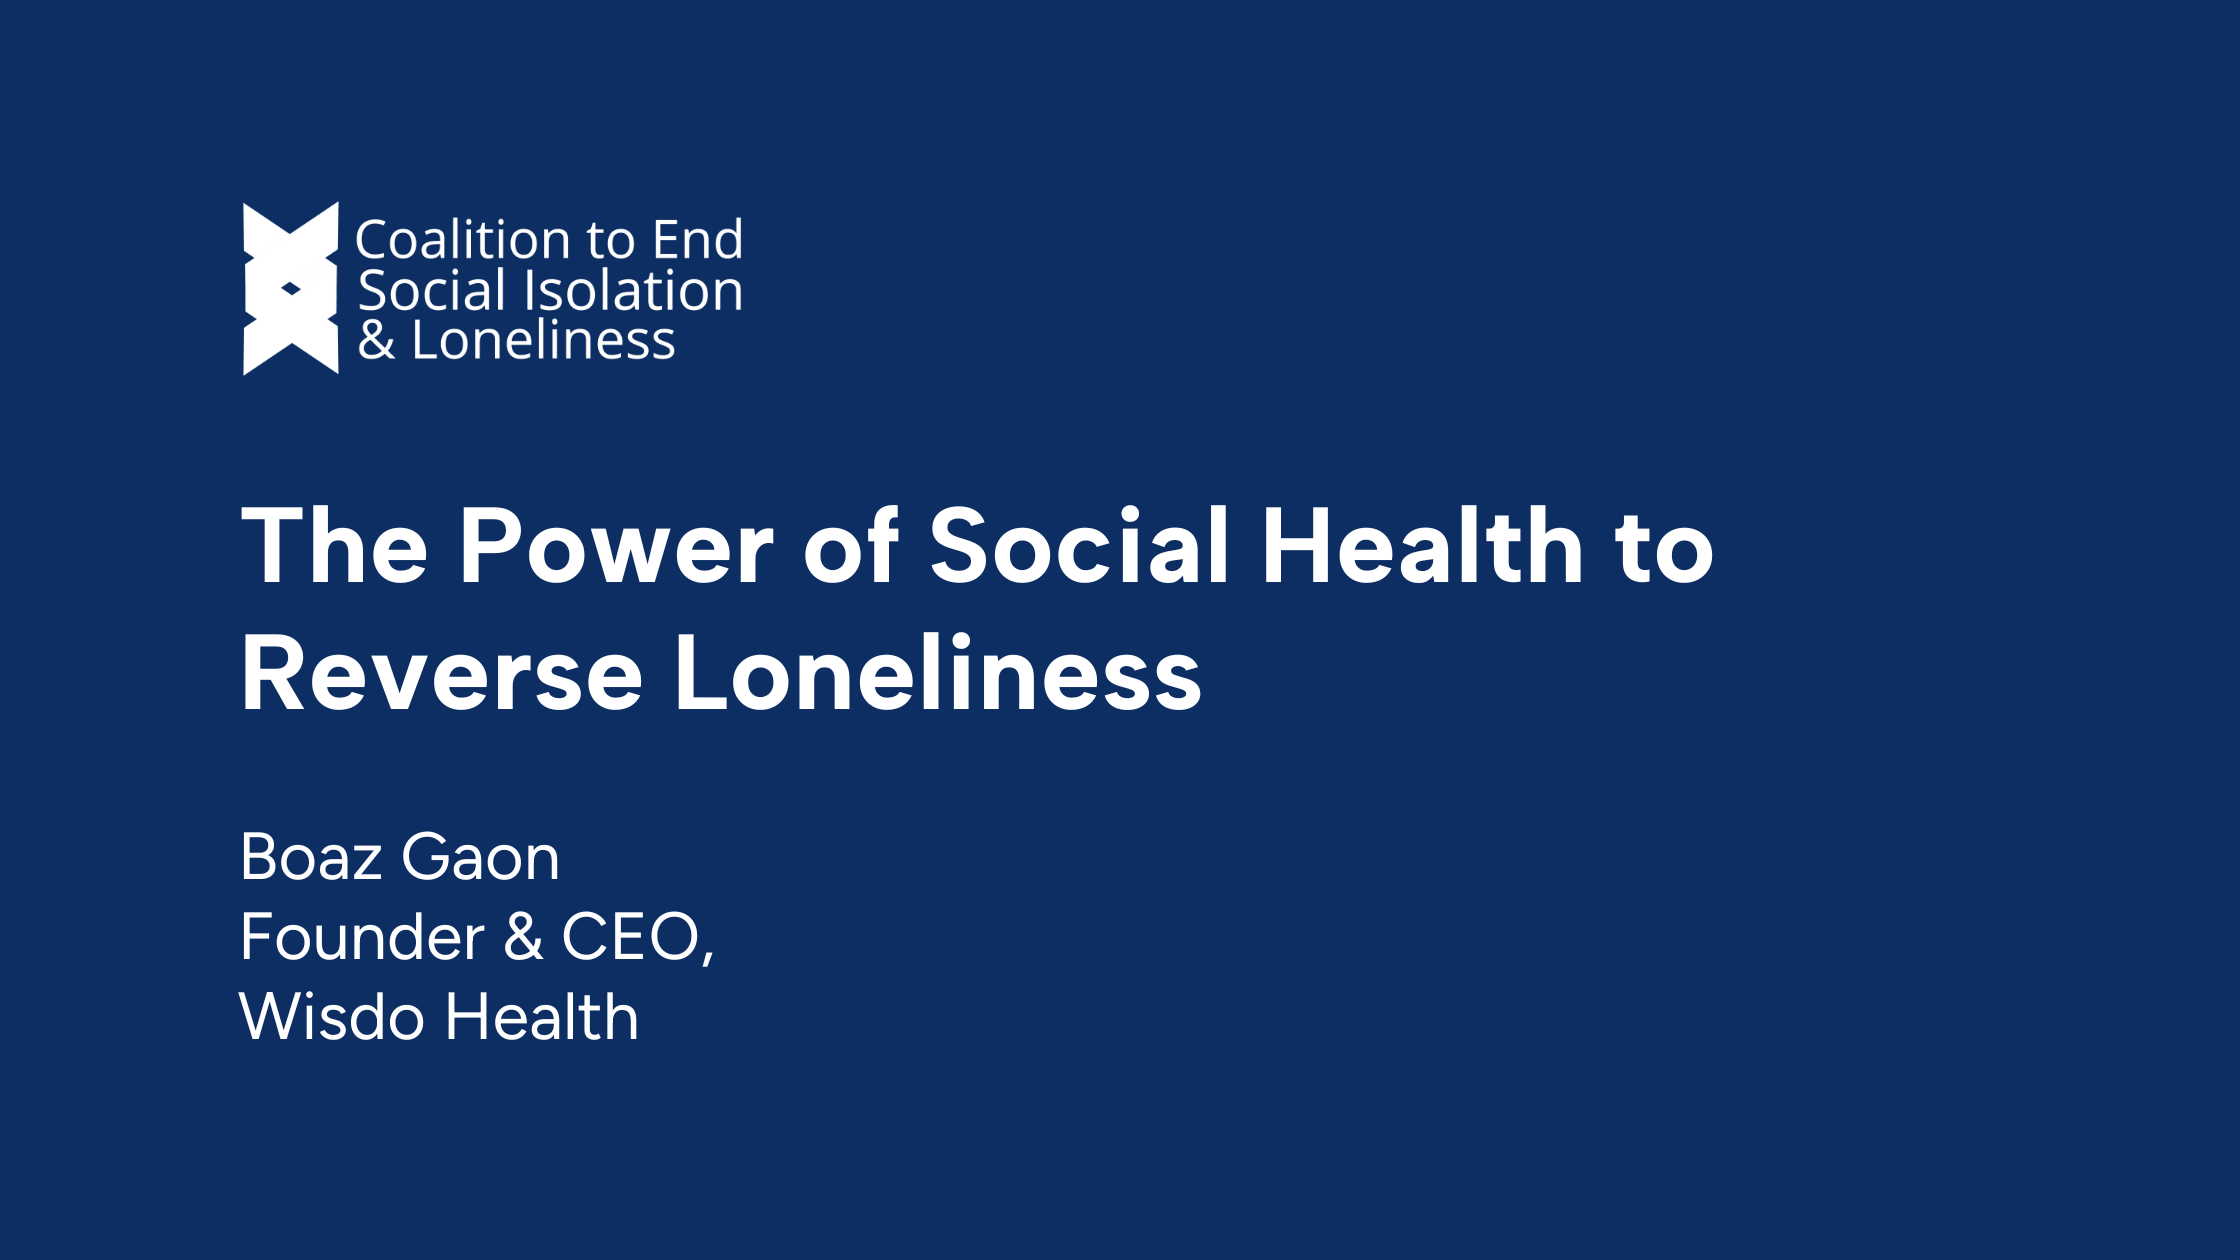 The Power of Social Health to Reverse Loneliness